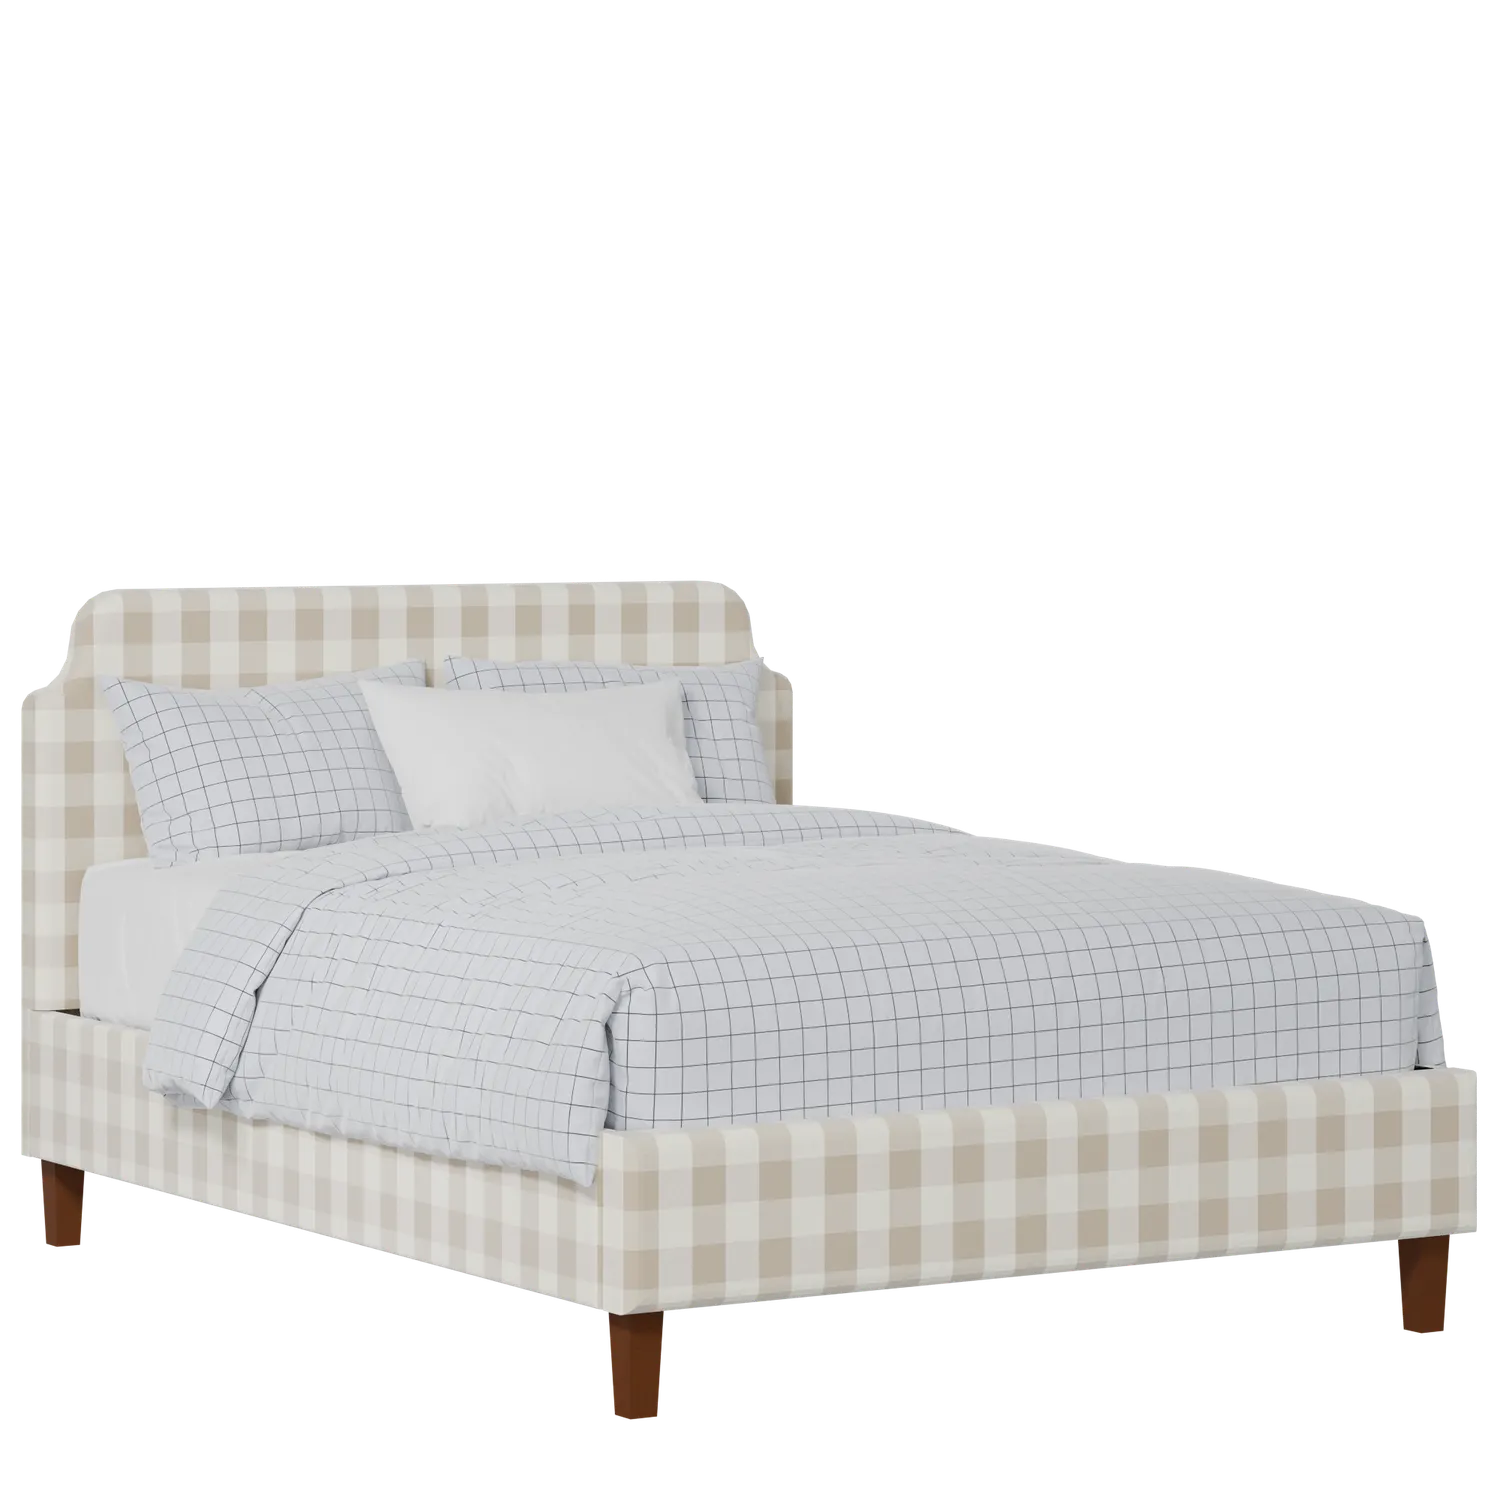 Charing Slim upholstered bed in Romo Kemble Putty fabric with Juno mattress